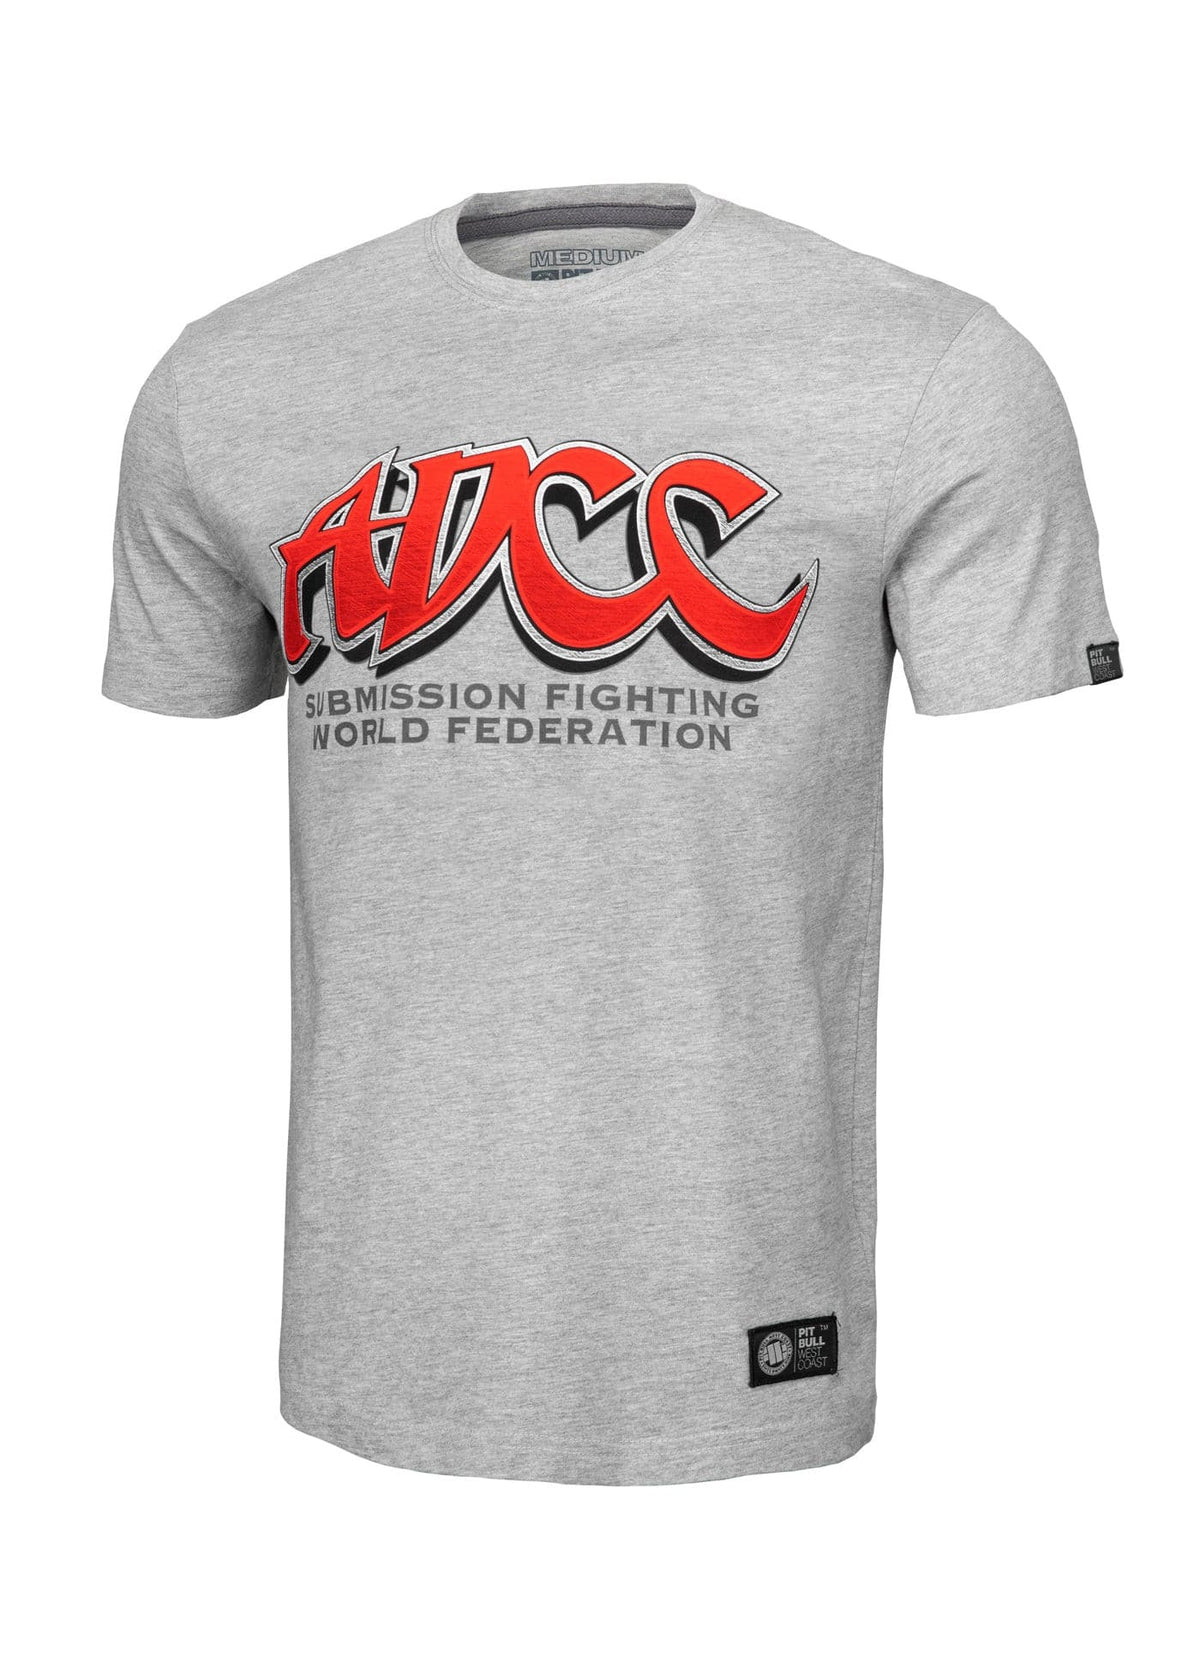 Official ADCC Grey T-Shirt